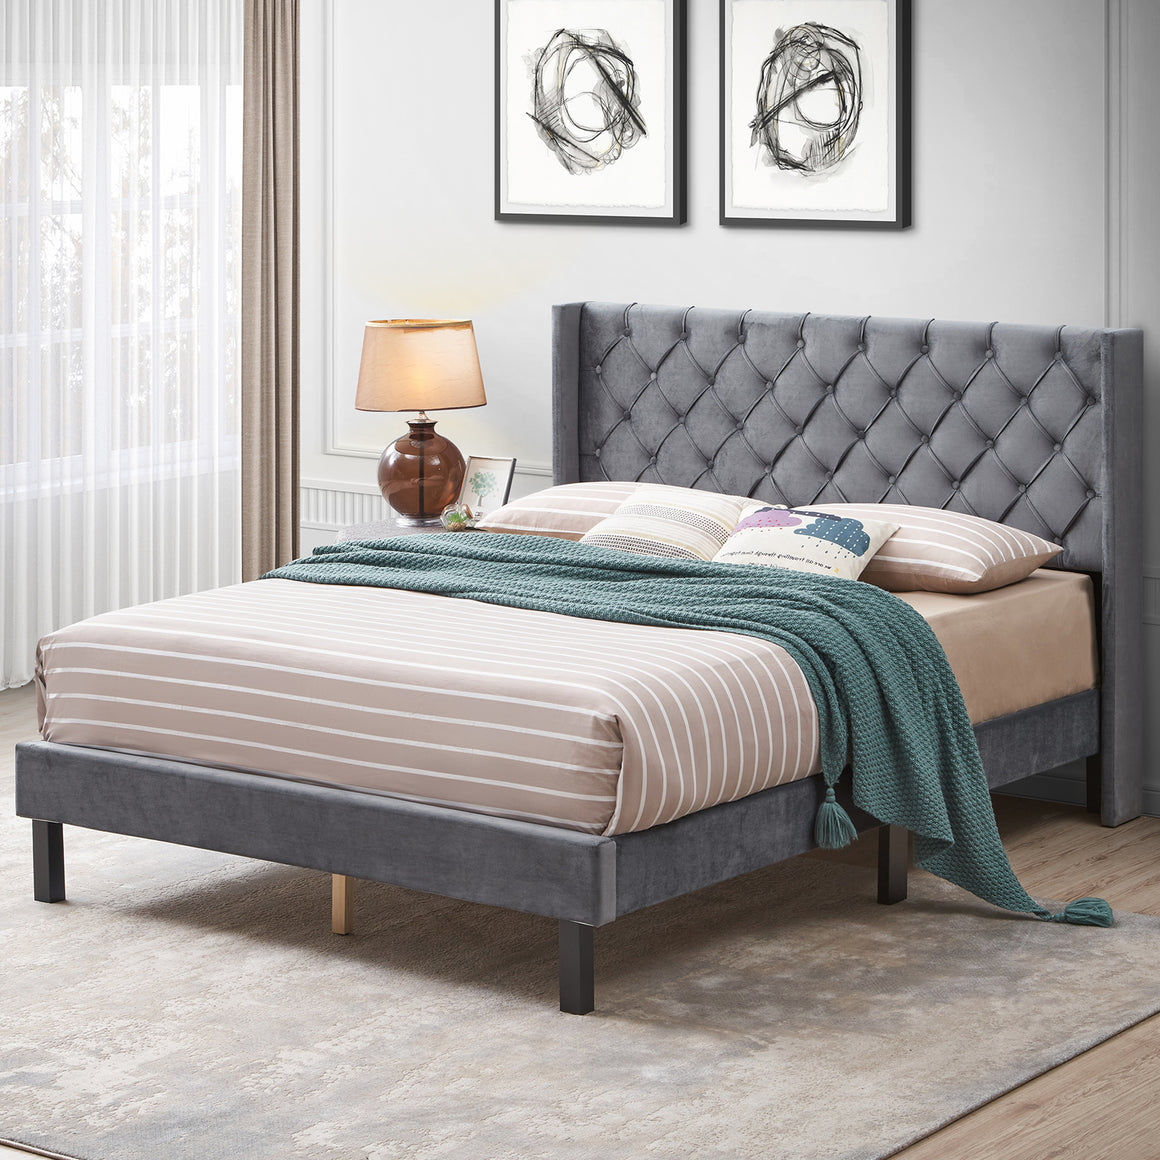 Grey Queen Bed Frame, Modern Velvet Upholstered Platform Bed Frame with Headboard, Heavy Duty Button Tufted Bed Frame with Wood Slat Support, Easy Assembly, No Box Spring Needed